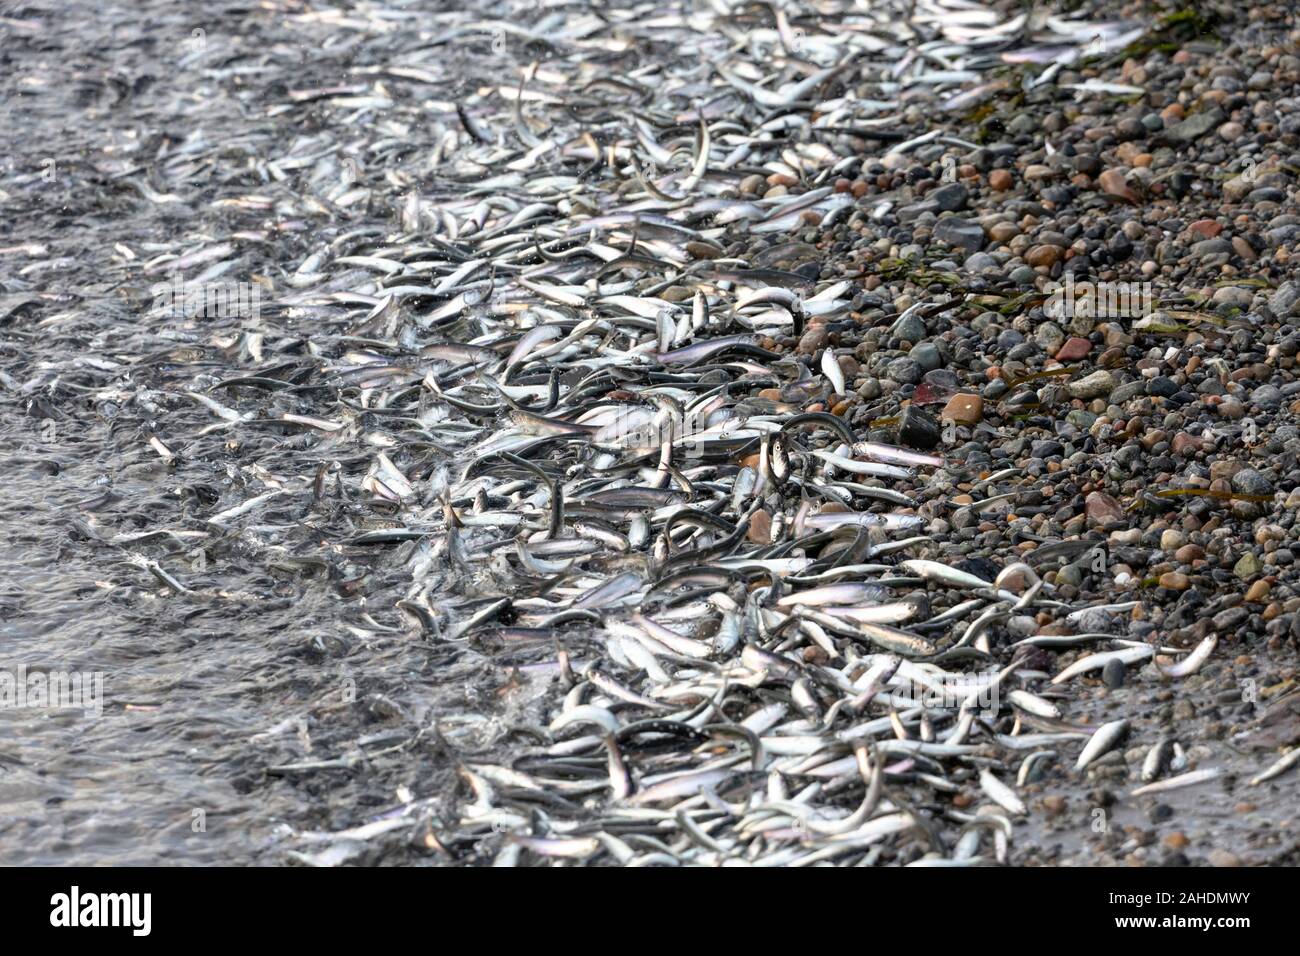 Northern Anchovies , thousands of tiny fish wash up on shore at White Rock Pier, BC Canada. Dec. 2019 Stock Photo